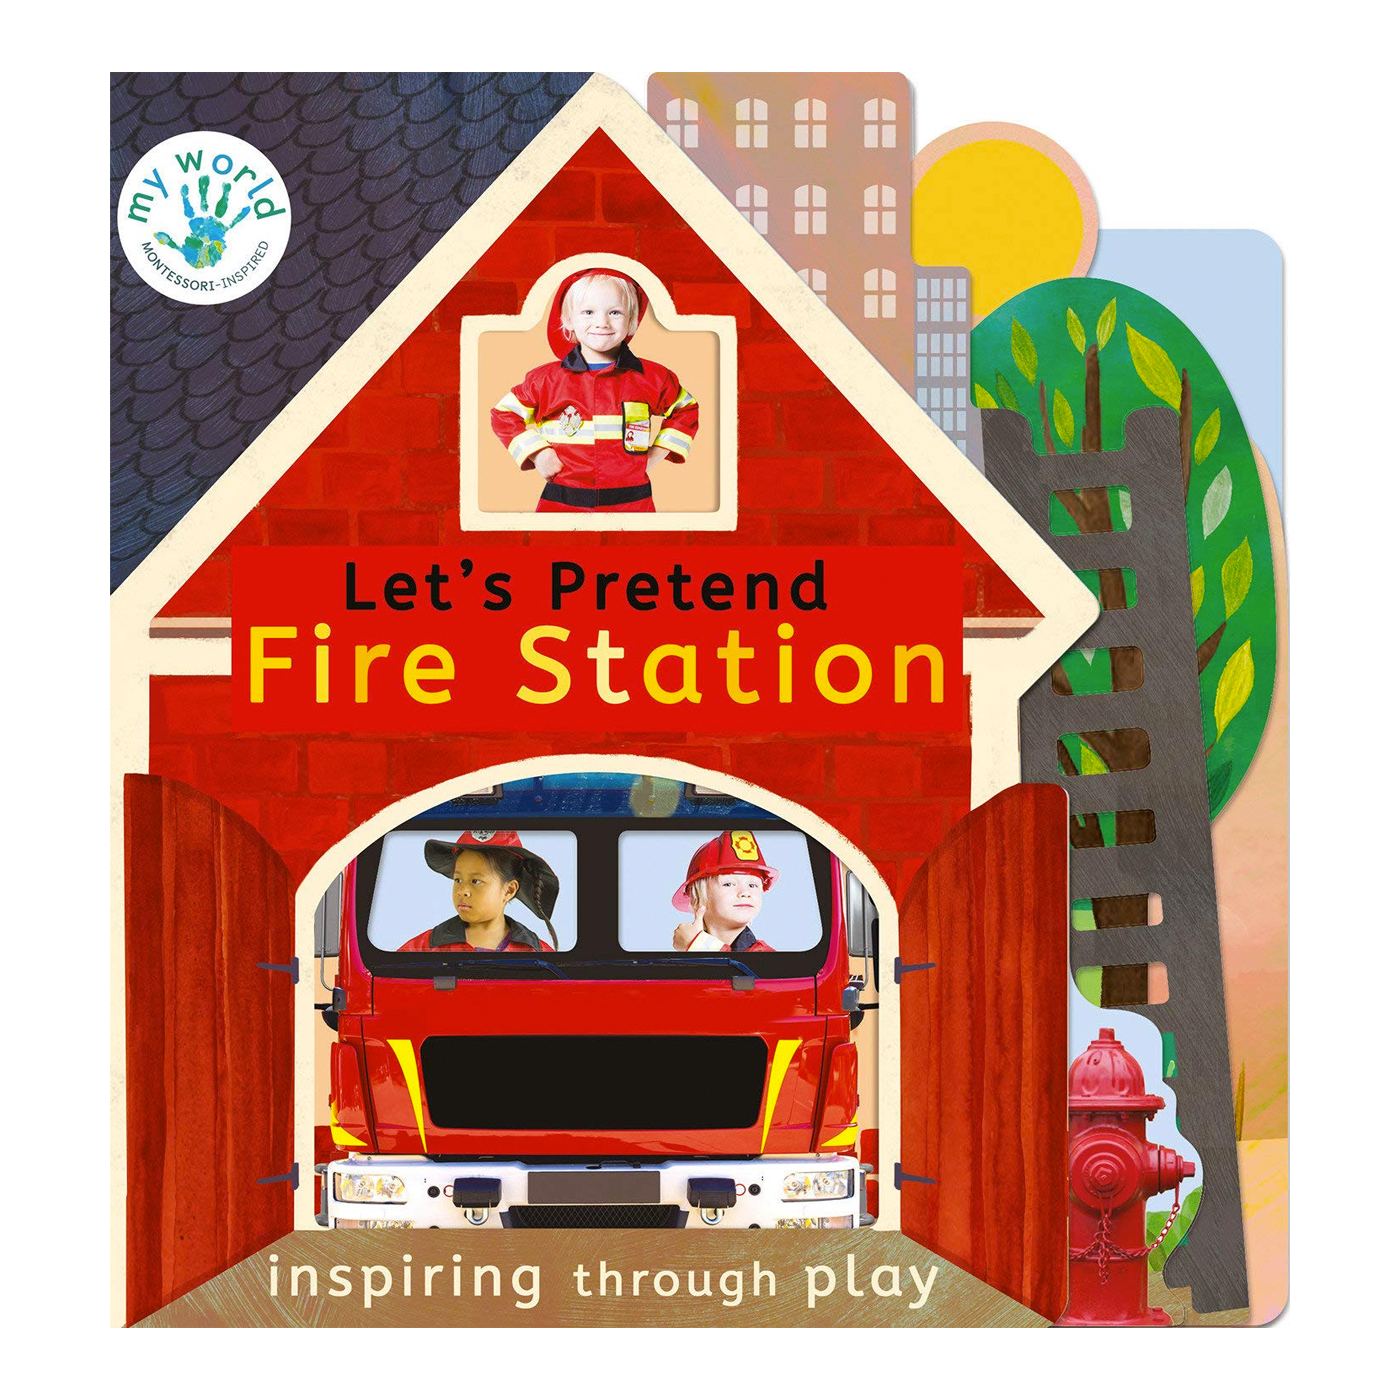  Let's Pretend Fire Station